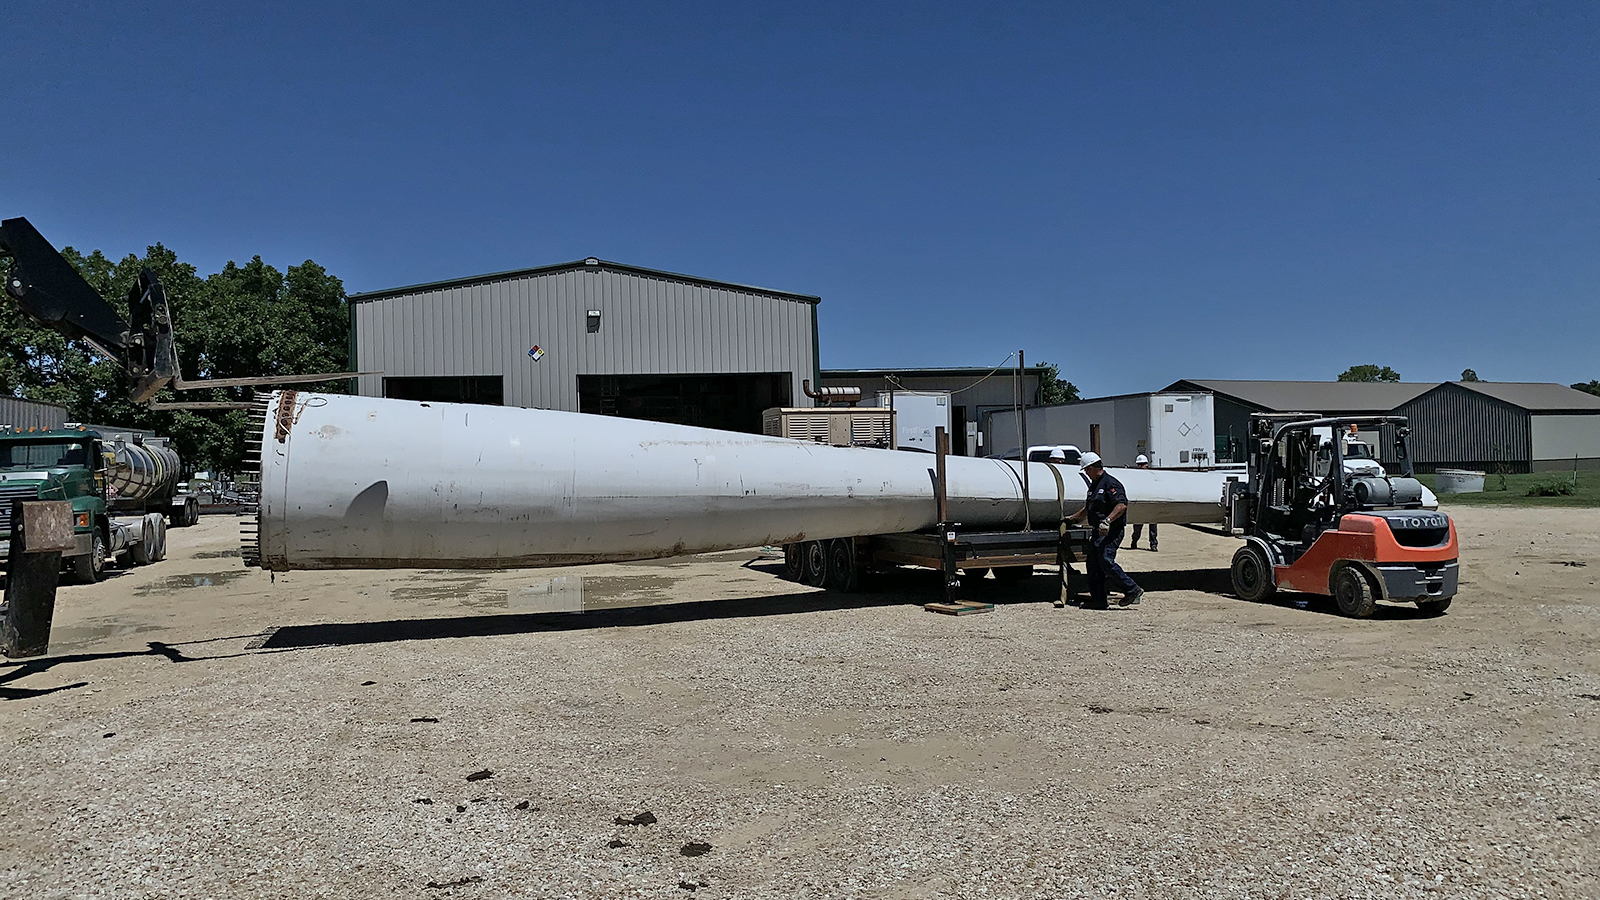 Today’s wind turbine blades could come to be tomorrow’s bridges